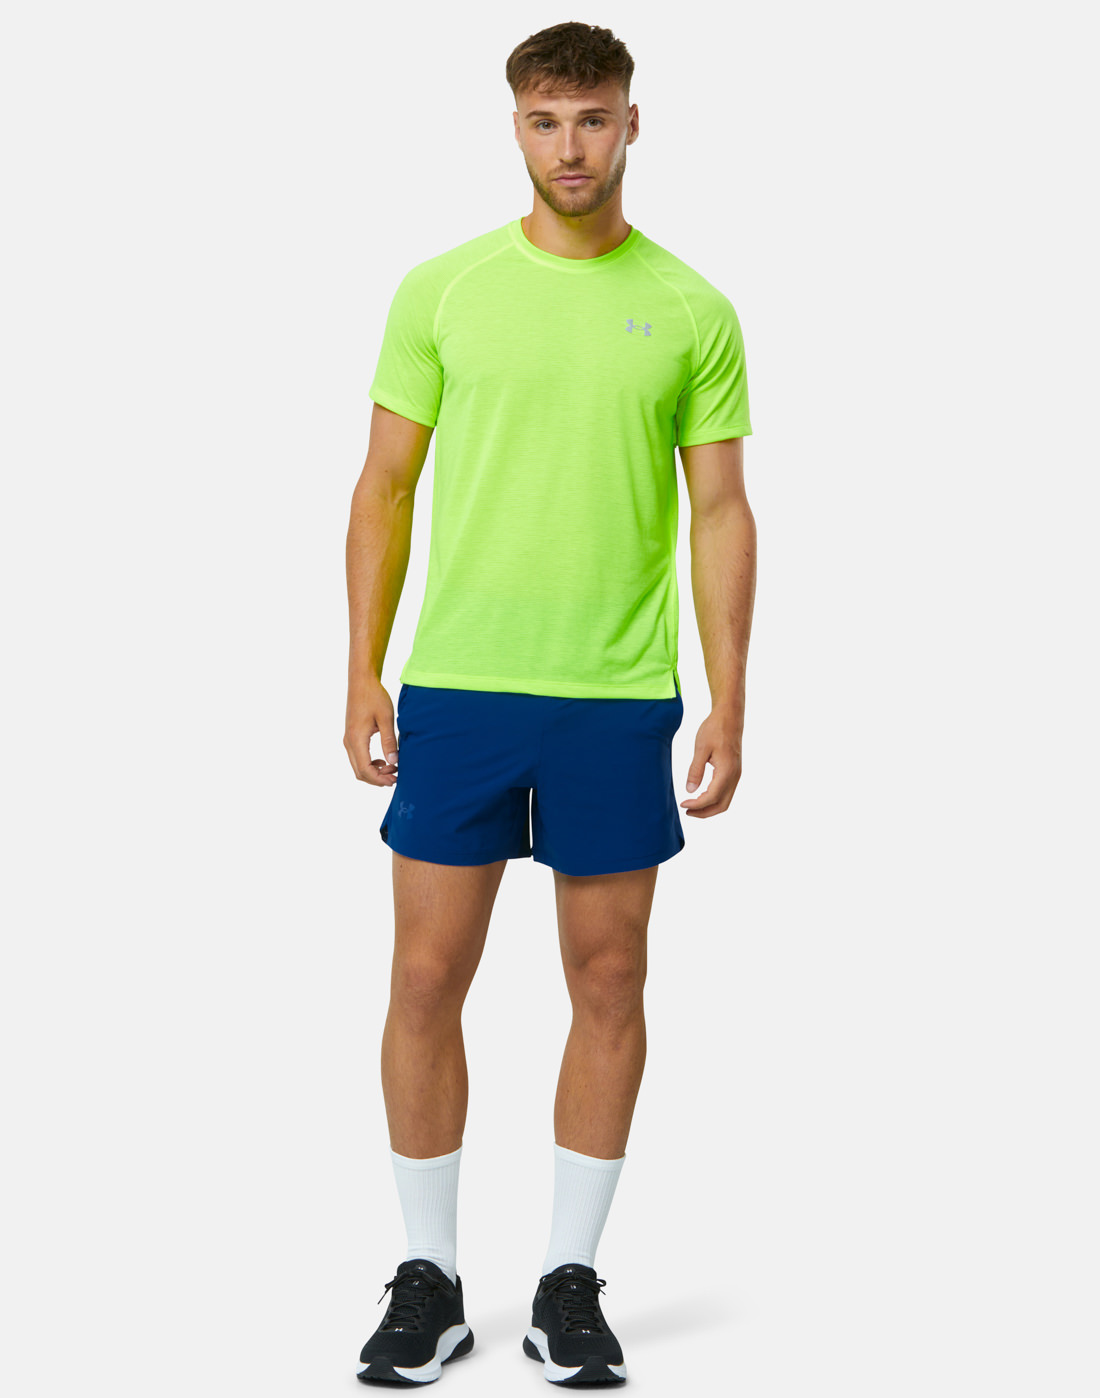 Under Armour Mens Launch 5 Inch Shorts - Blue | Life Style Sports UK